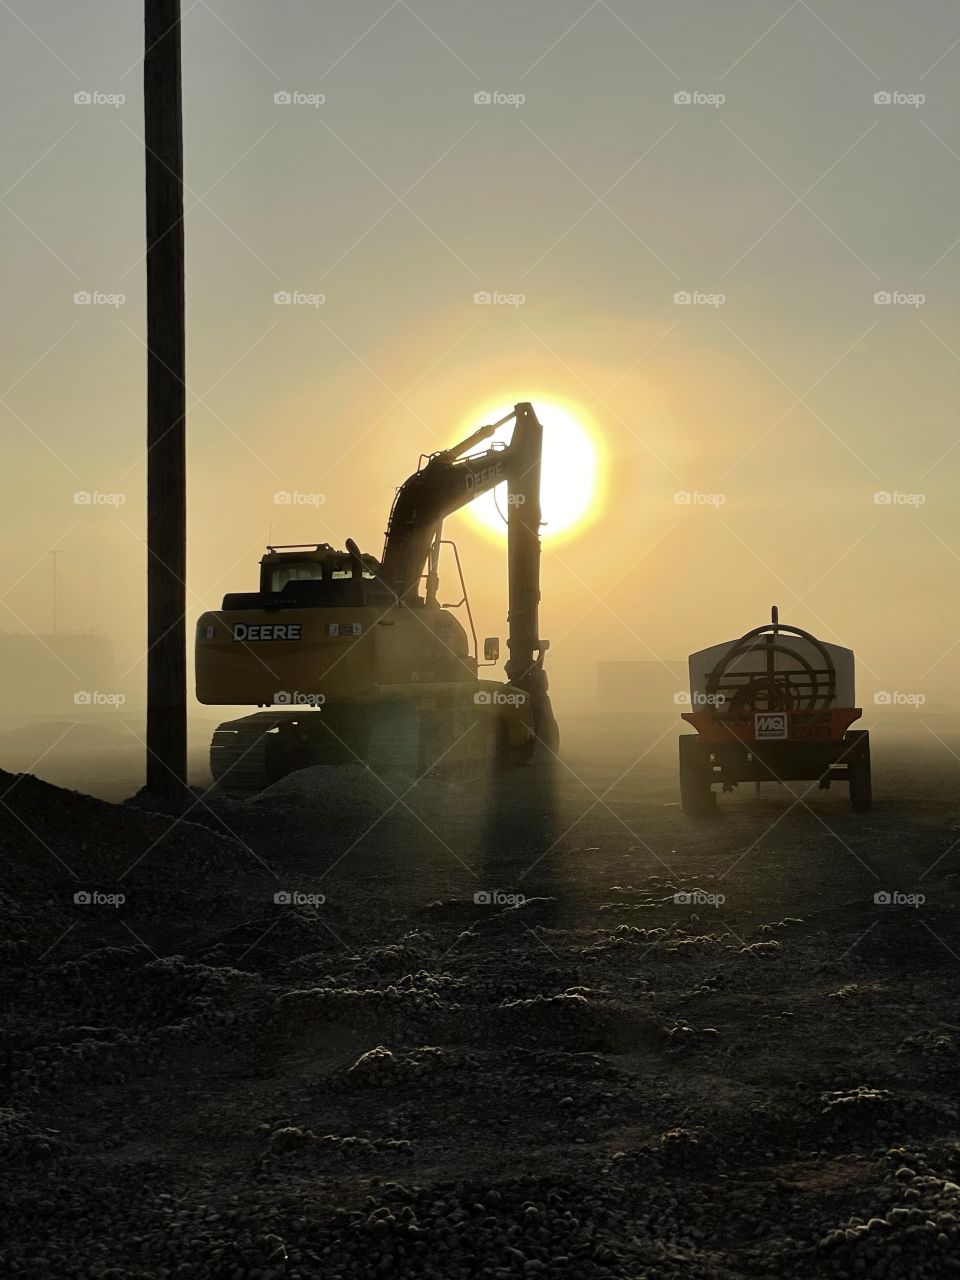 Early morning fog as the sun rises on the job site.